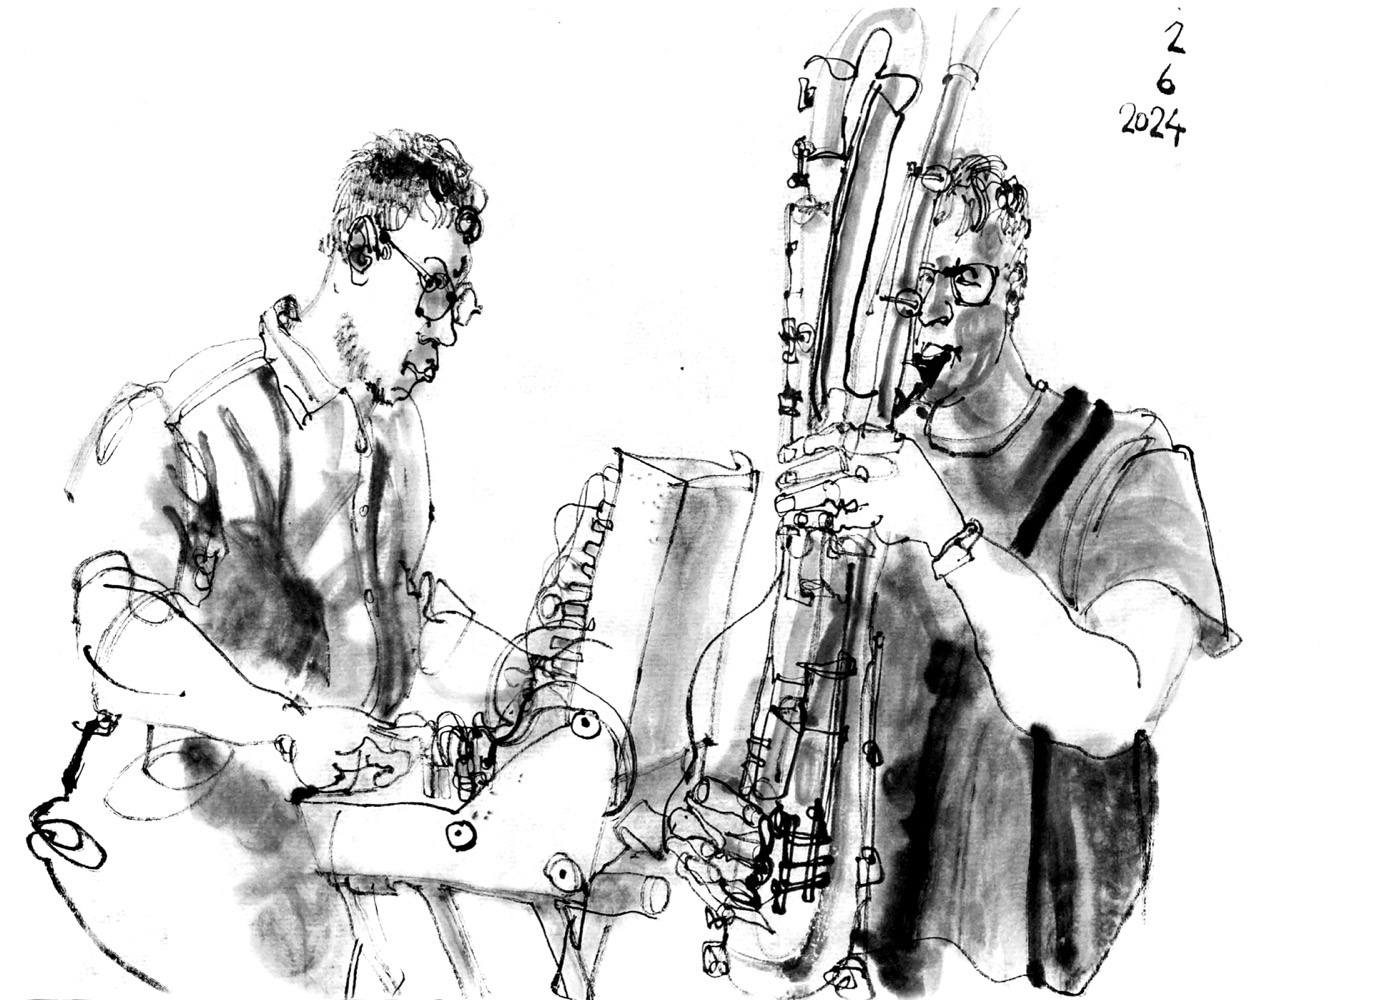 Ink drawing of a man, playing a synthesizer and another man playing the contrabass clarinet